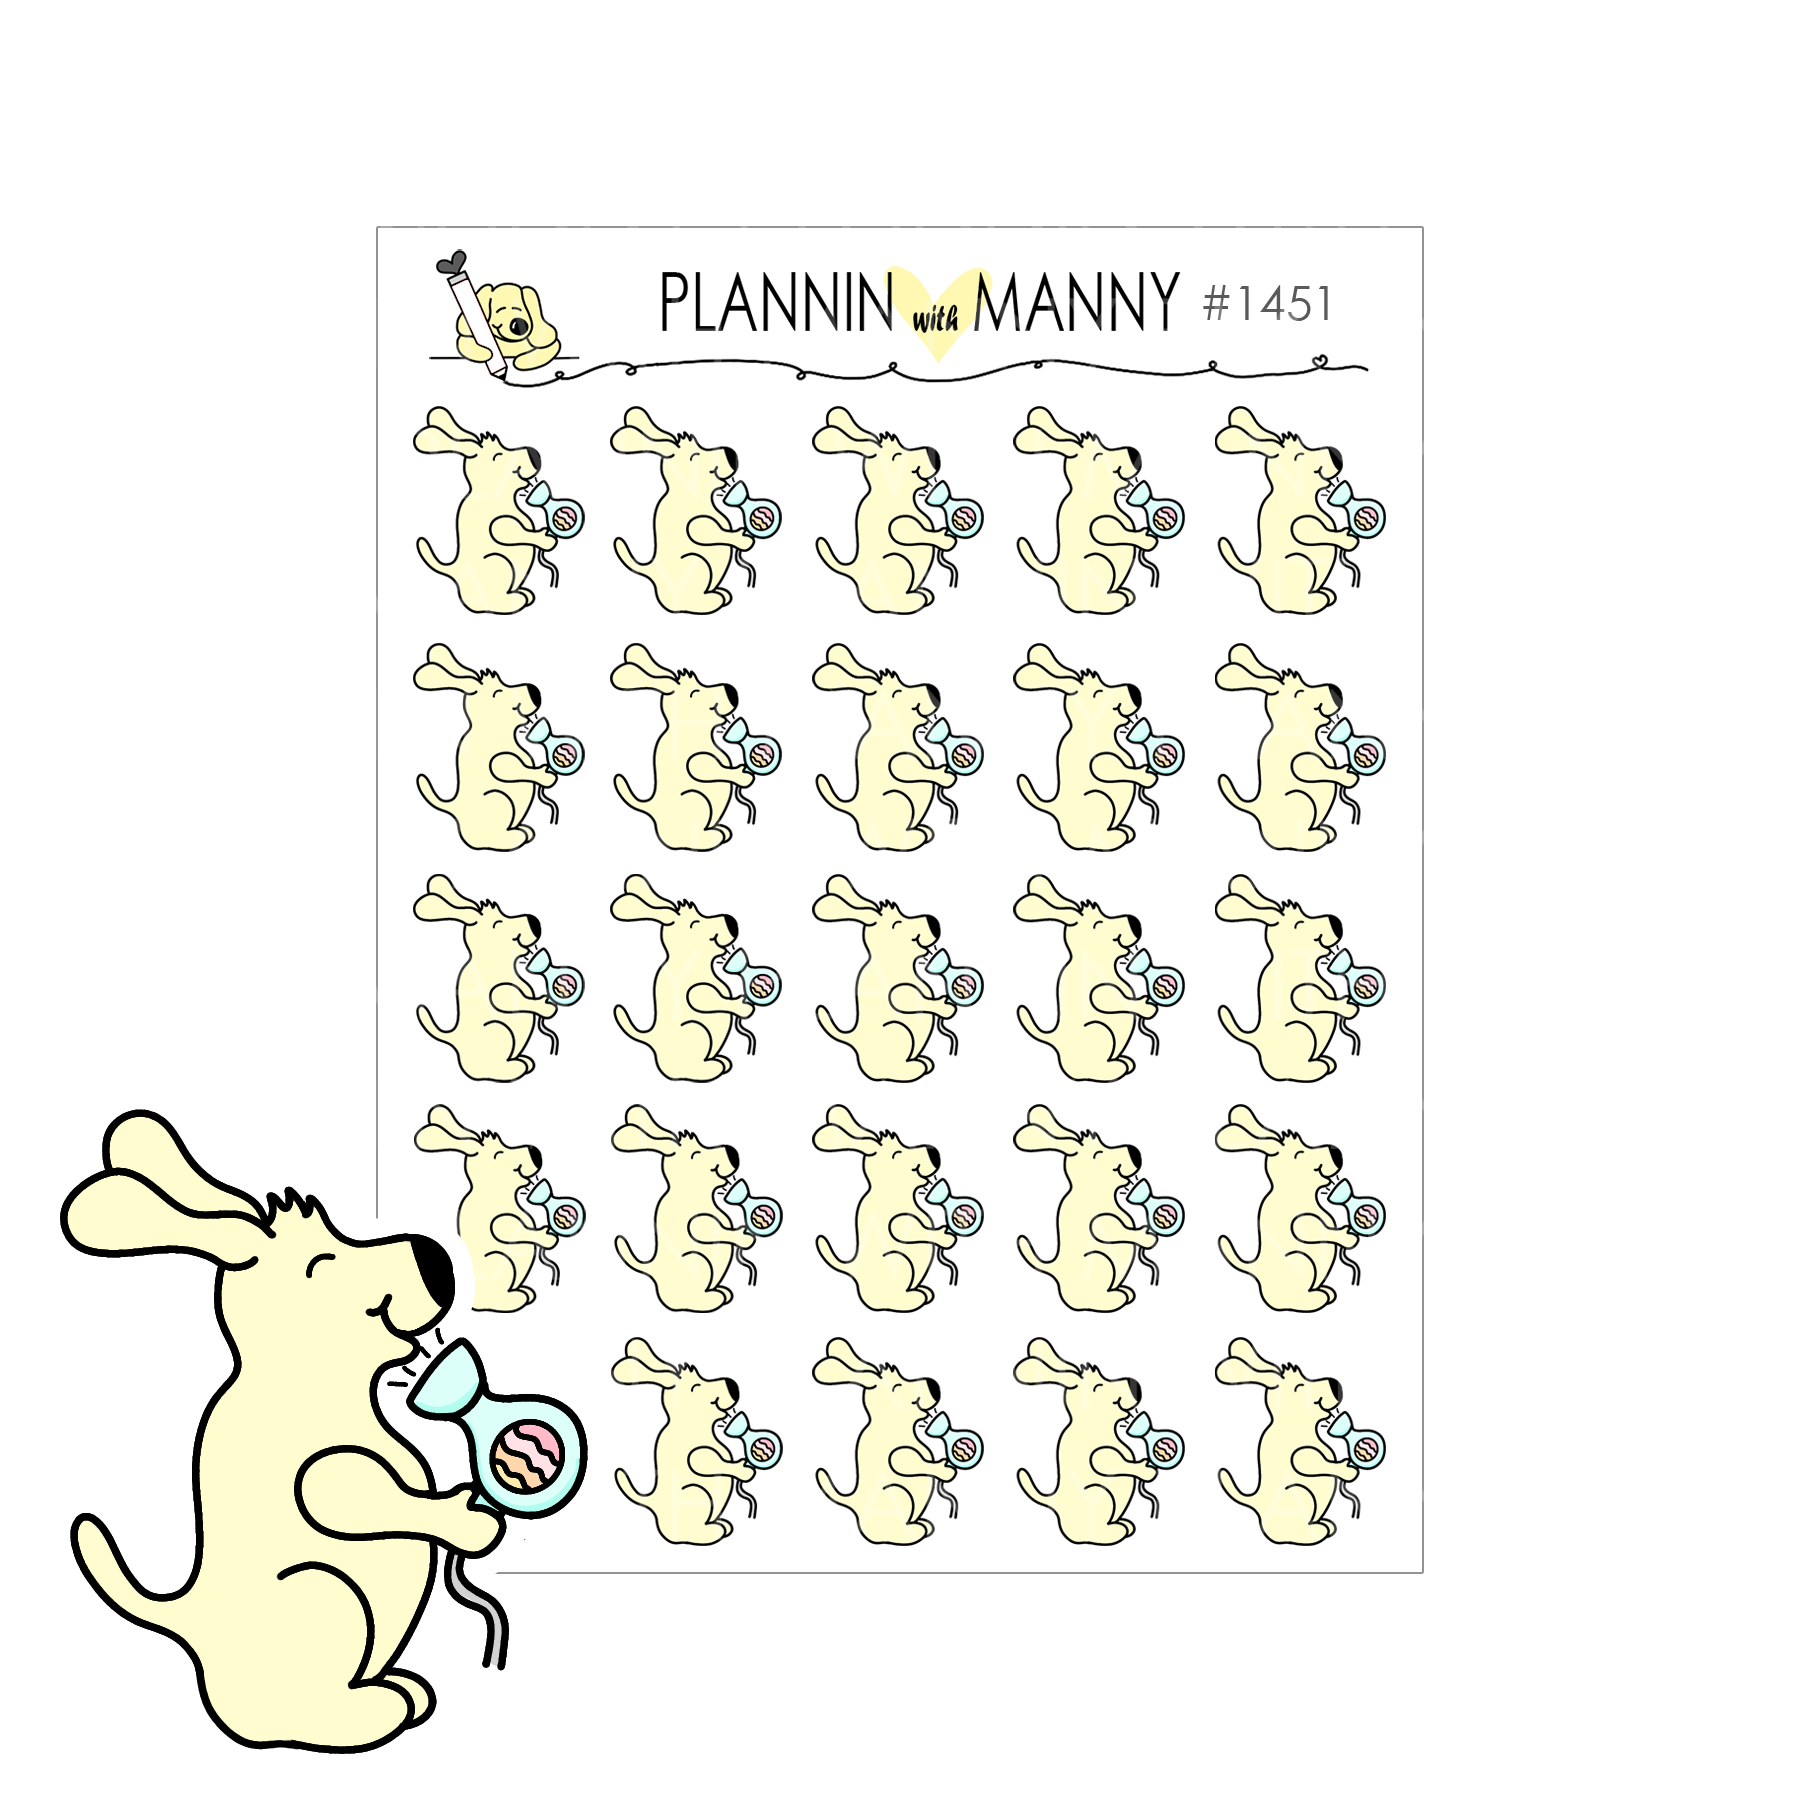 1451 Hair Drying Manny Planner Stickers